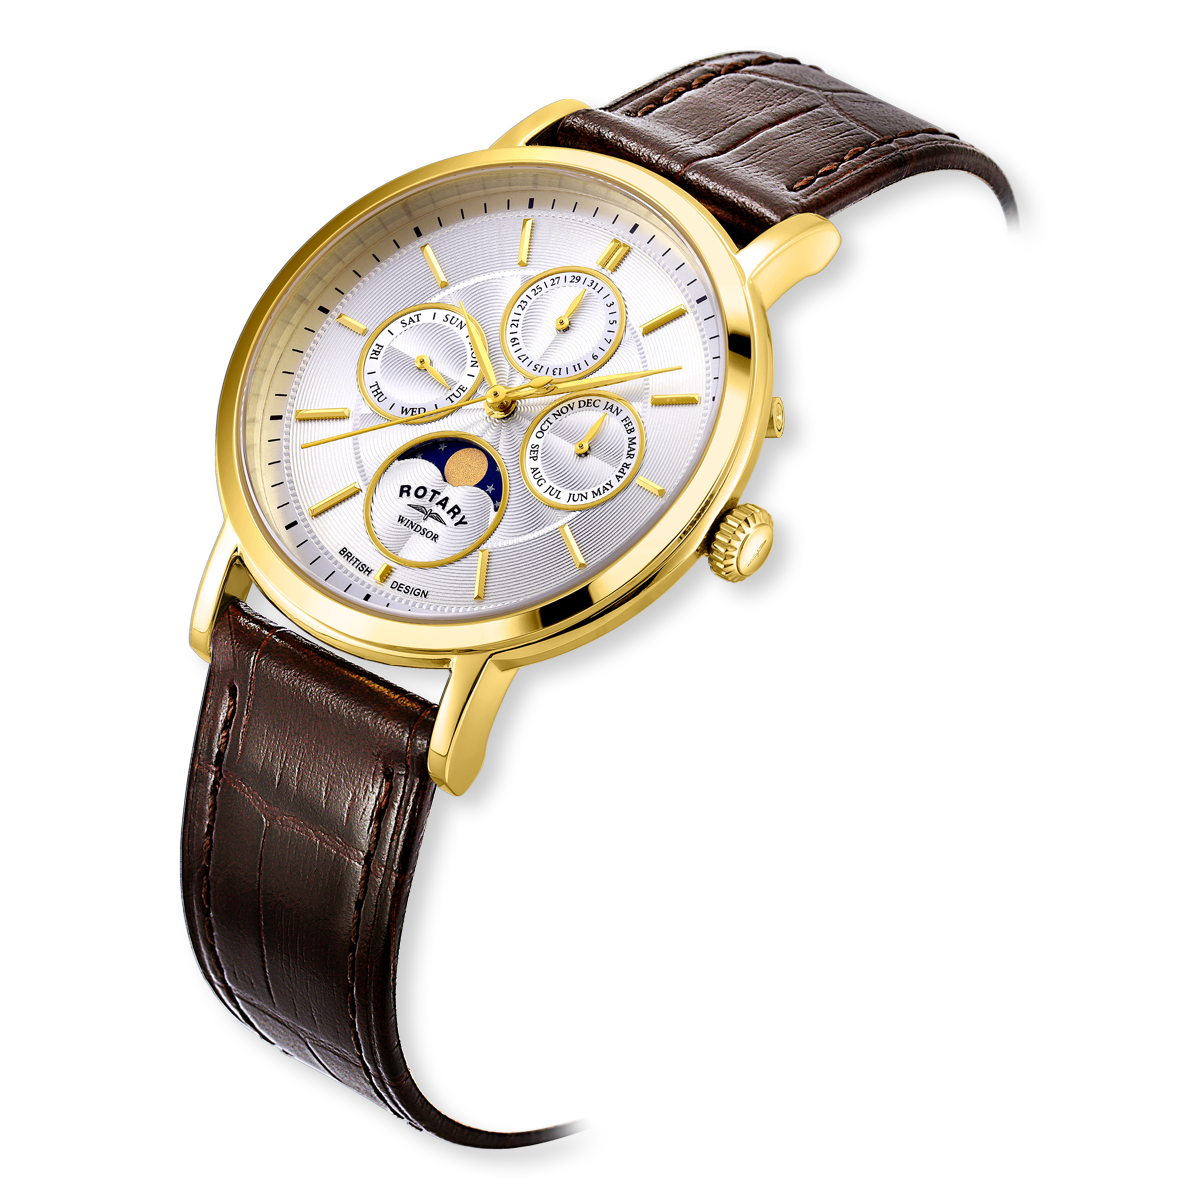 Rotary Windsor Moonphase, Silver Dial with Brown Leather Strap & Gold Plated Case - GS05428/06